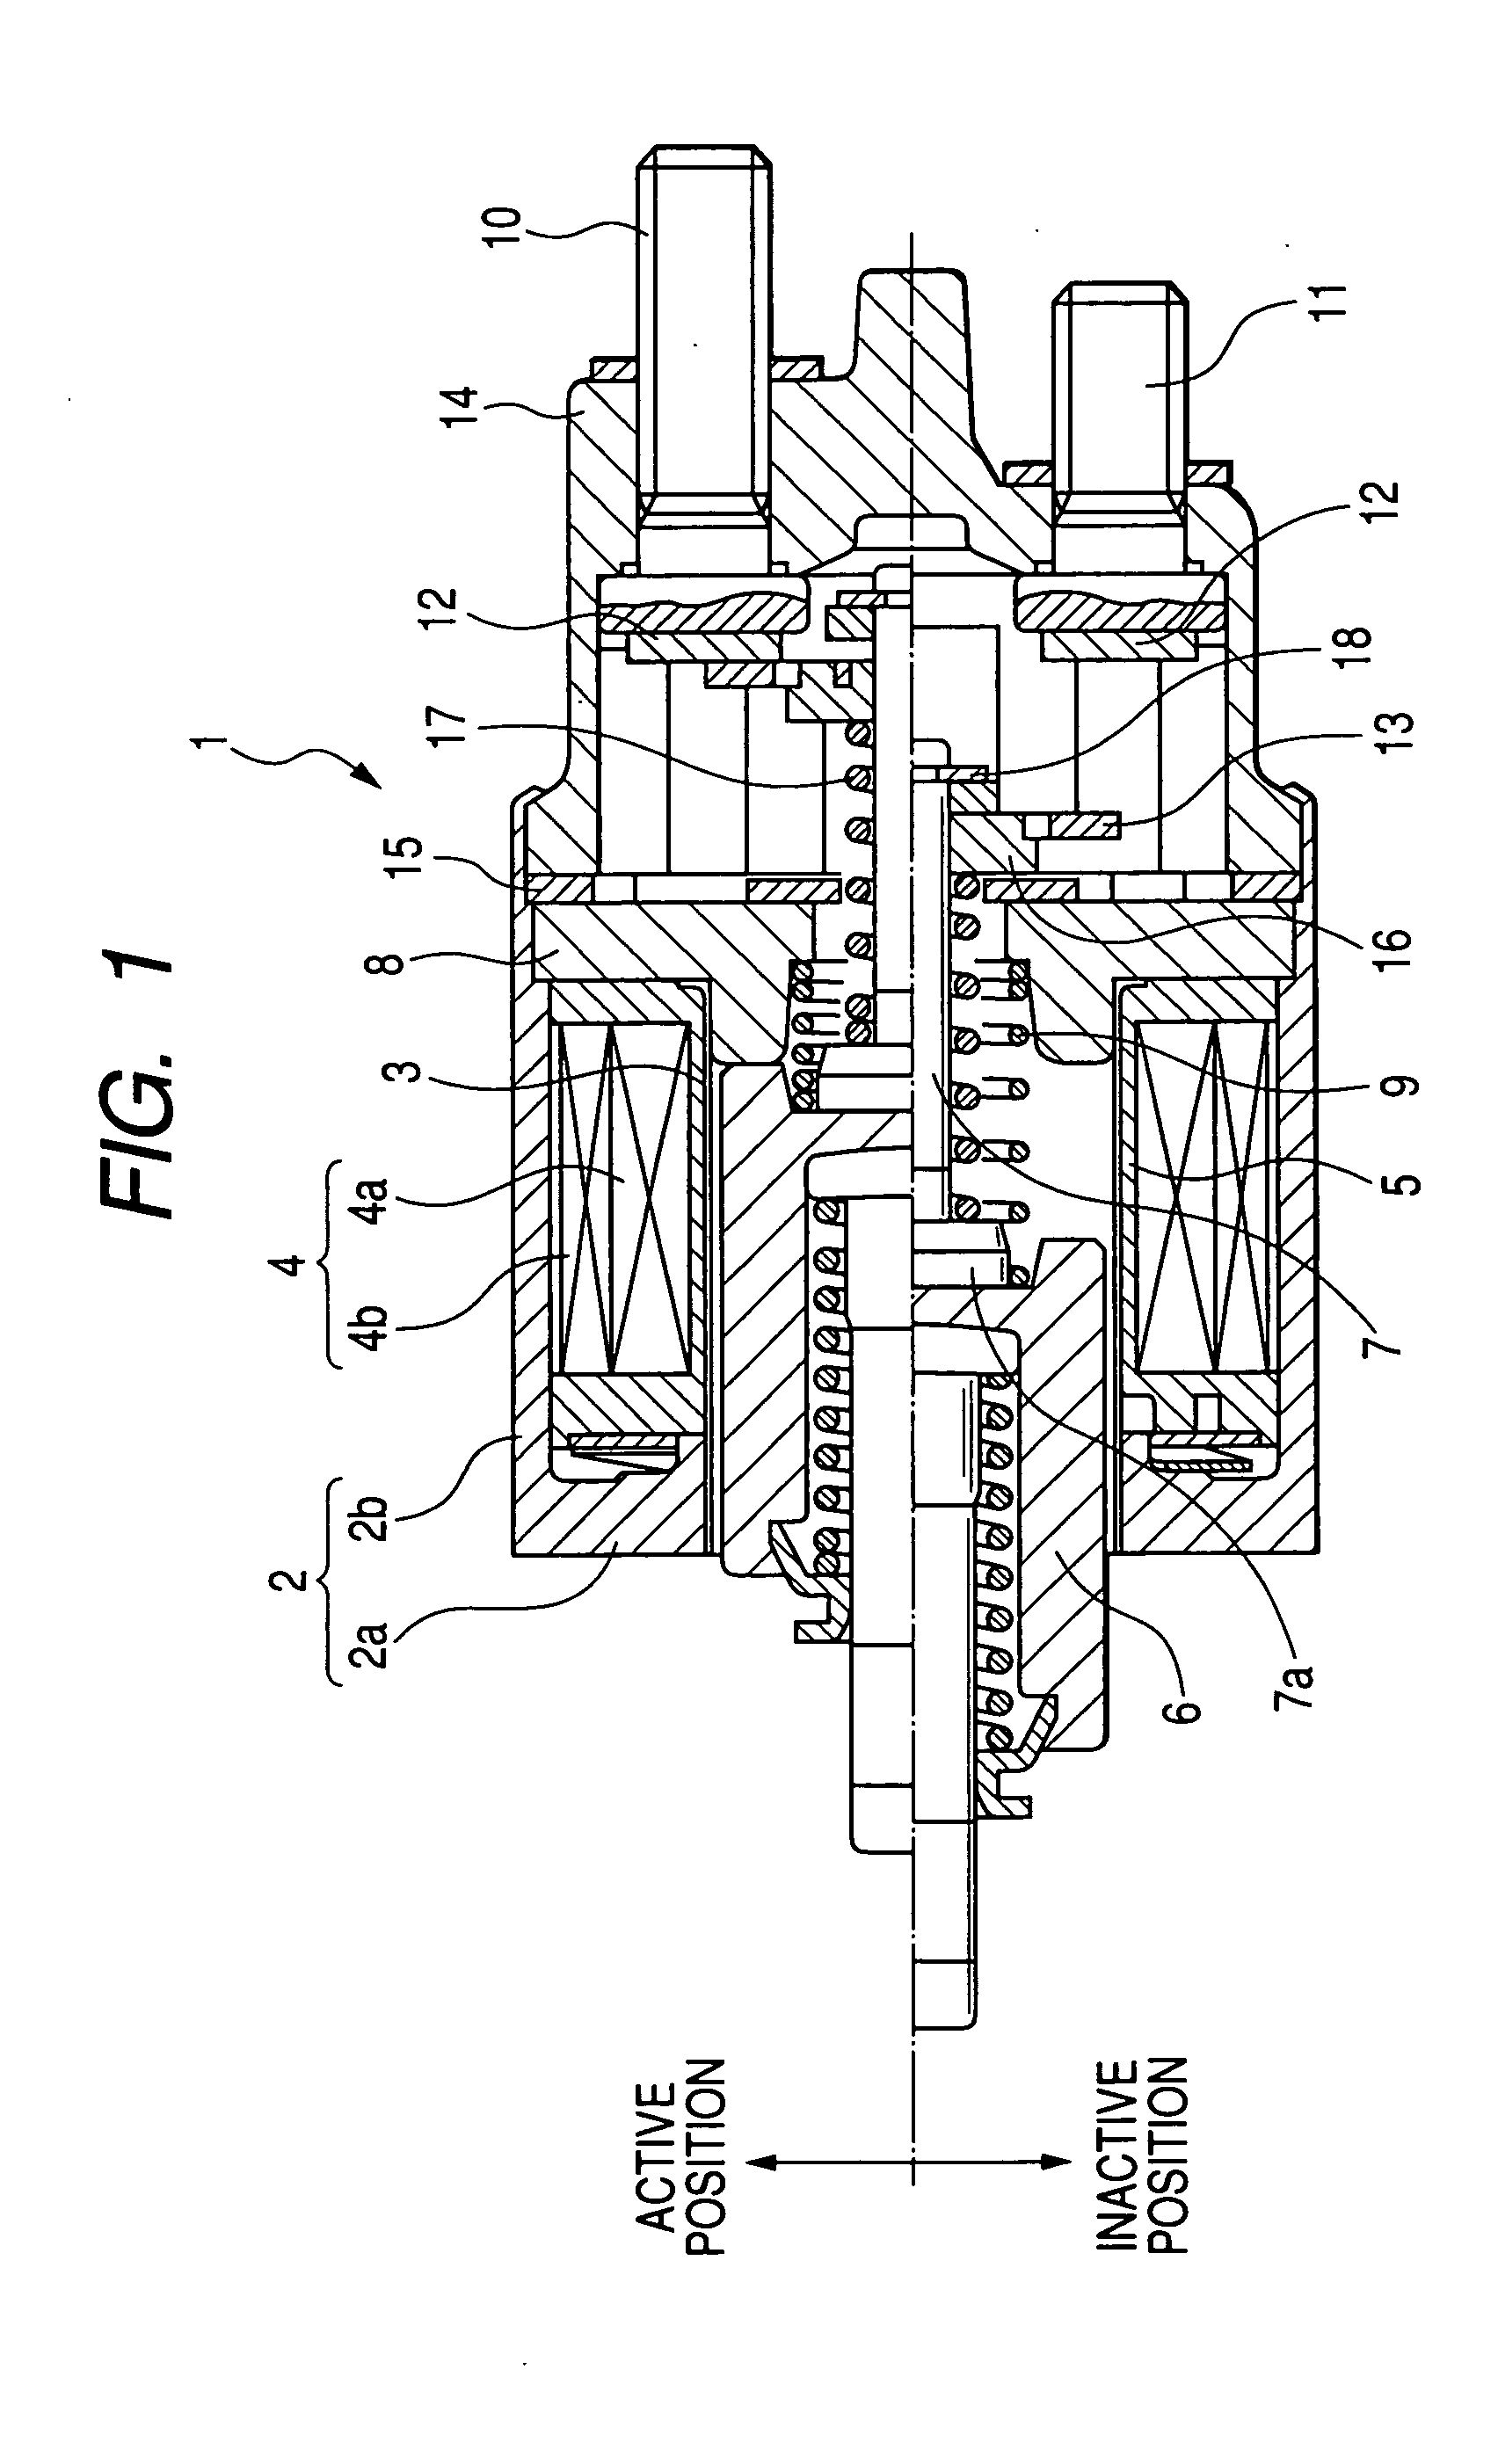 Structure of electromagnetic switch for starter